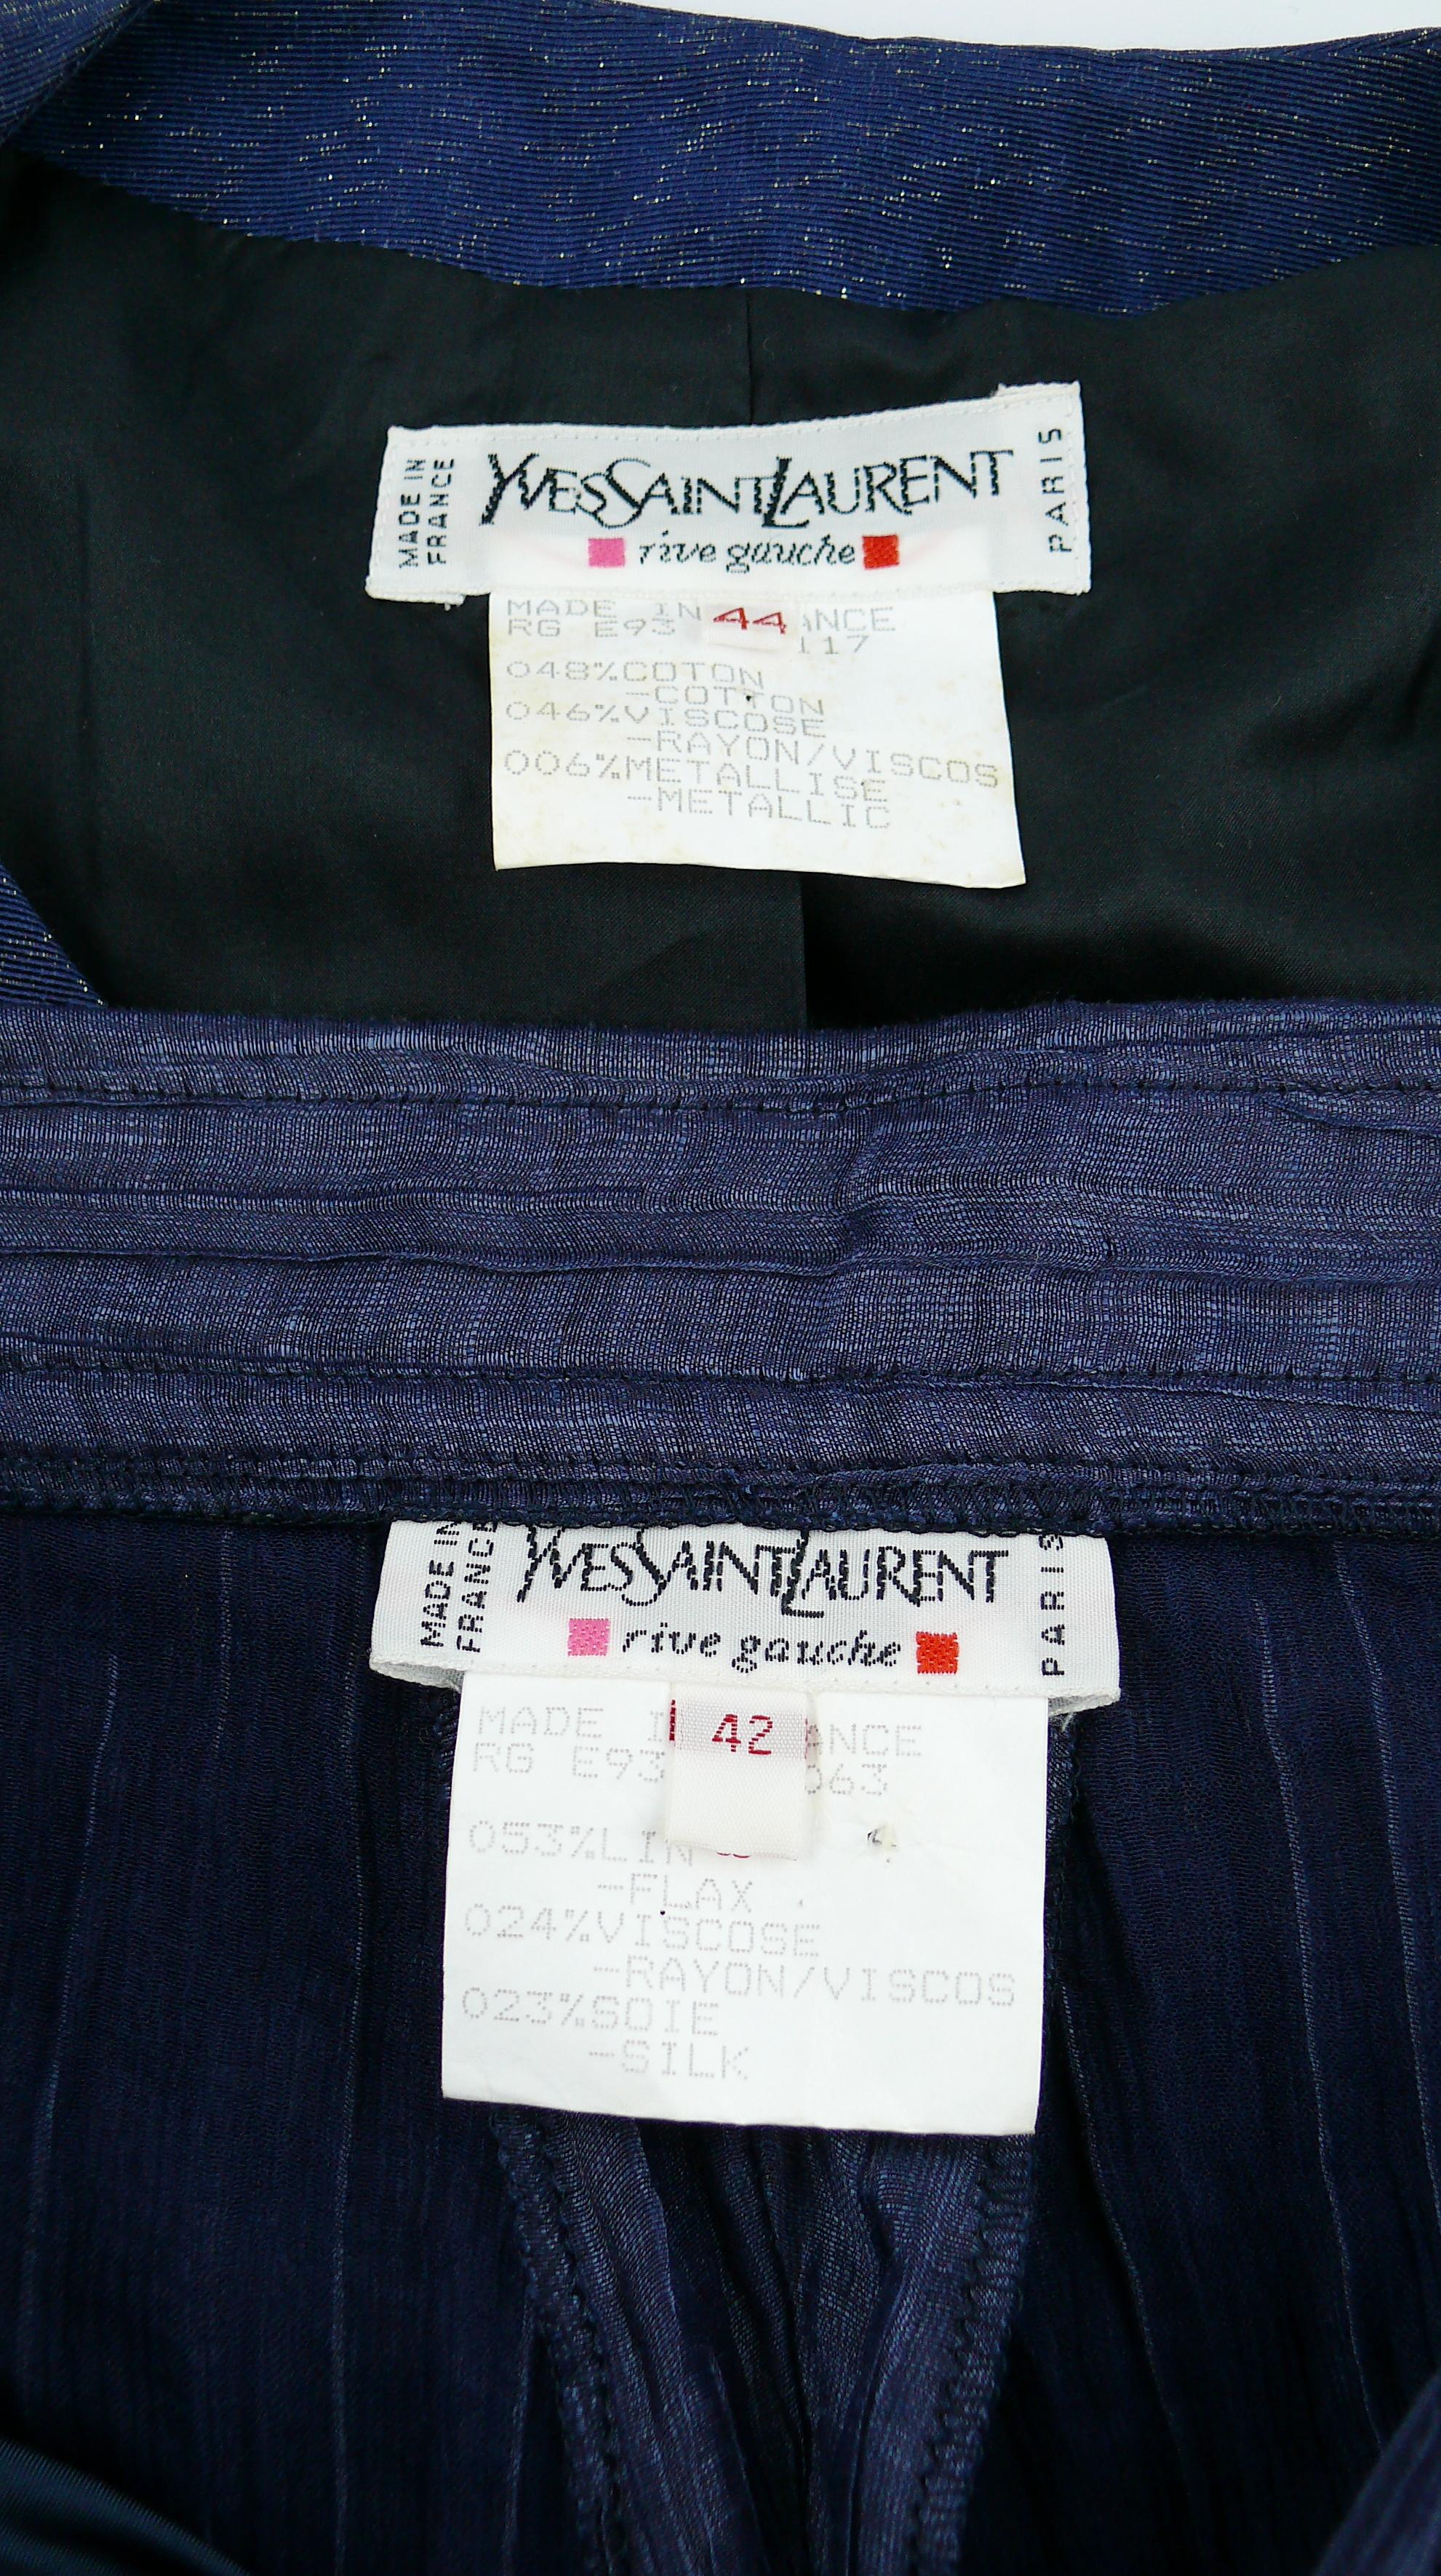 Yves Saint Laurent Documented Oriental Cropped Jacket and Harem Pants Ensemble For Sale 3